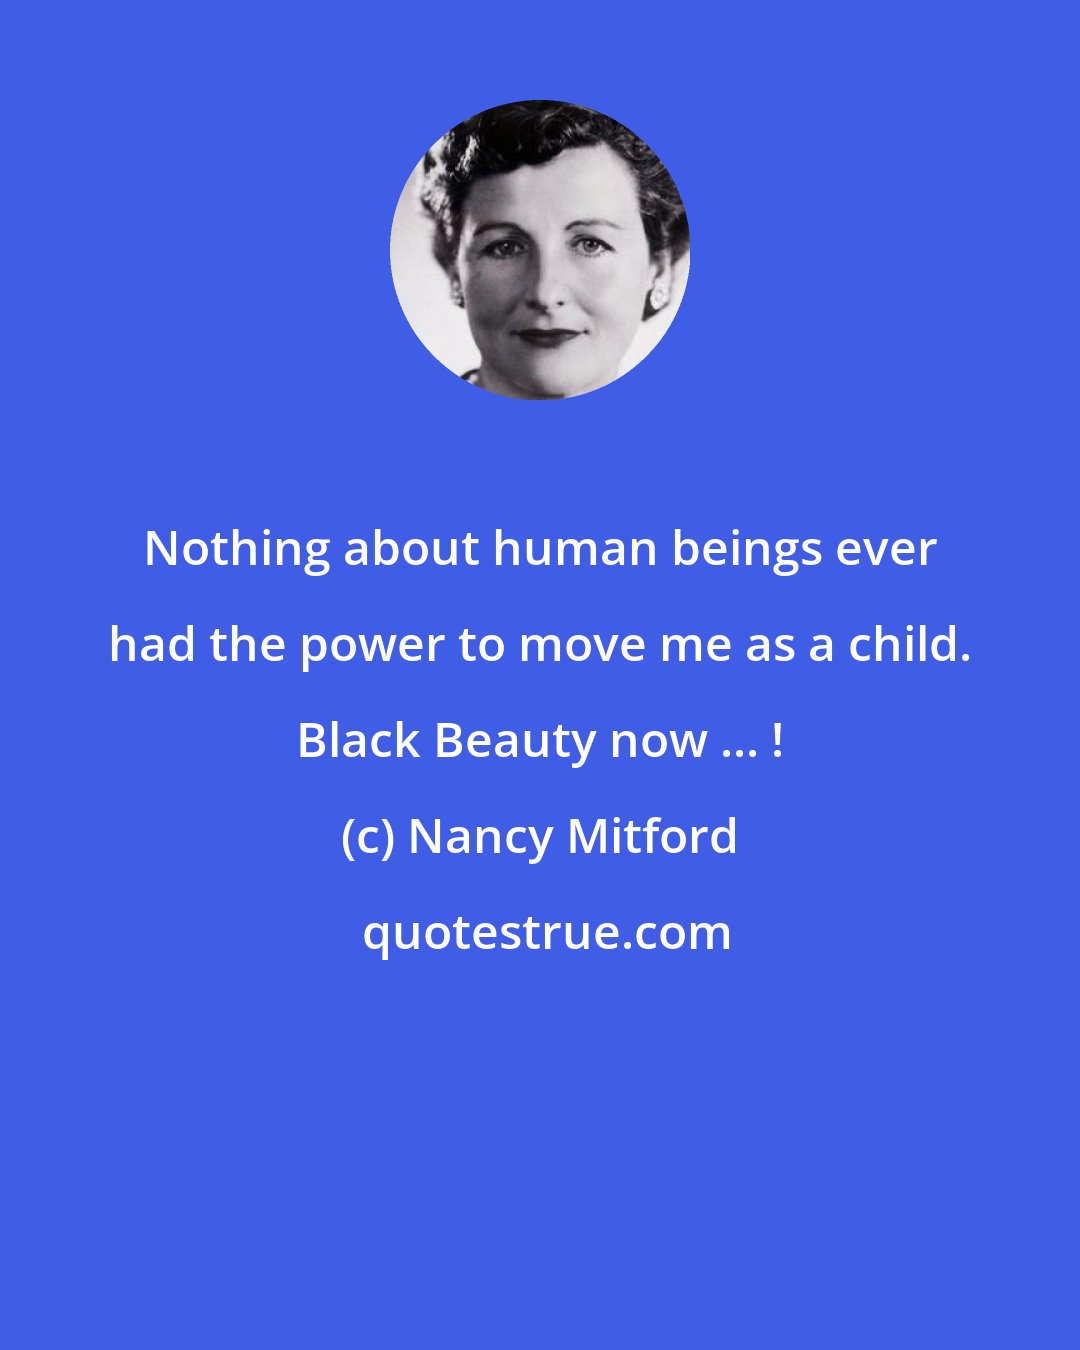 Nancy Mitford: Nothing about human beings ever had the power to move me as a child. Black Beauty now ... !